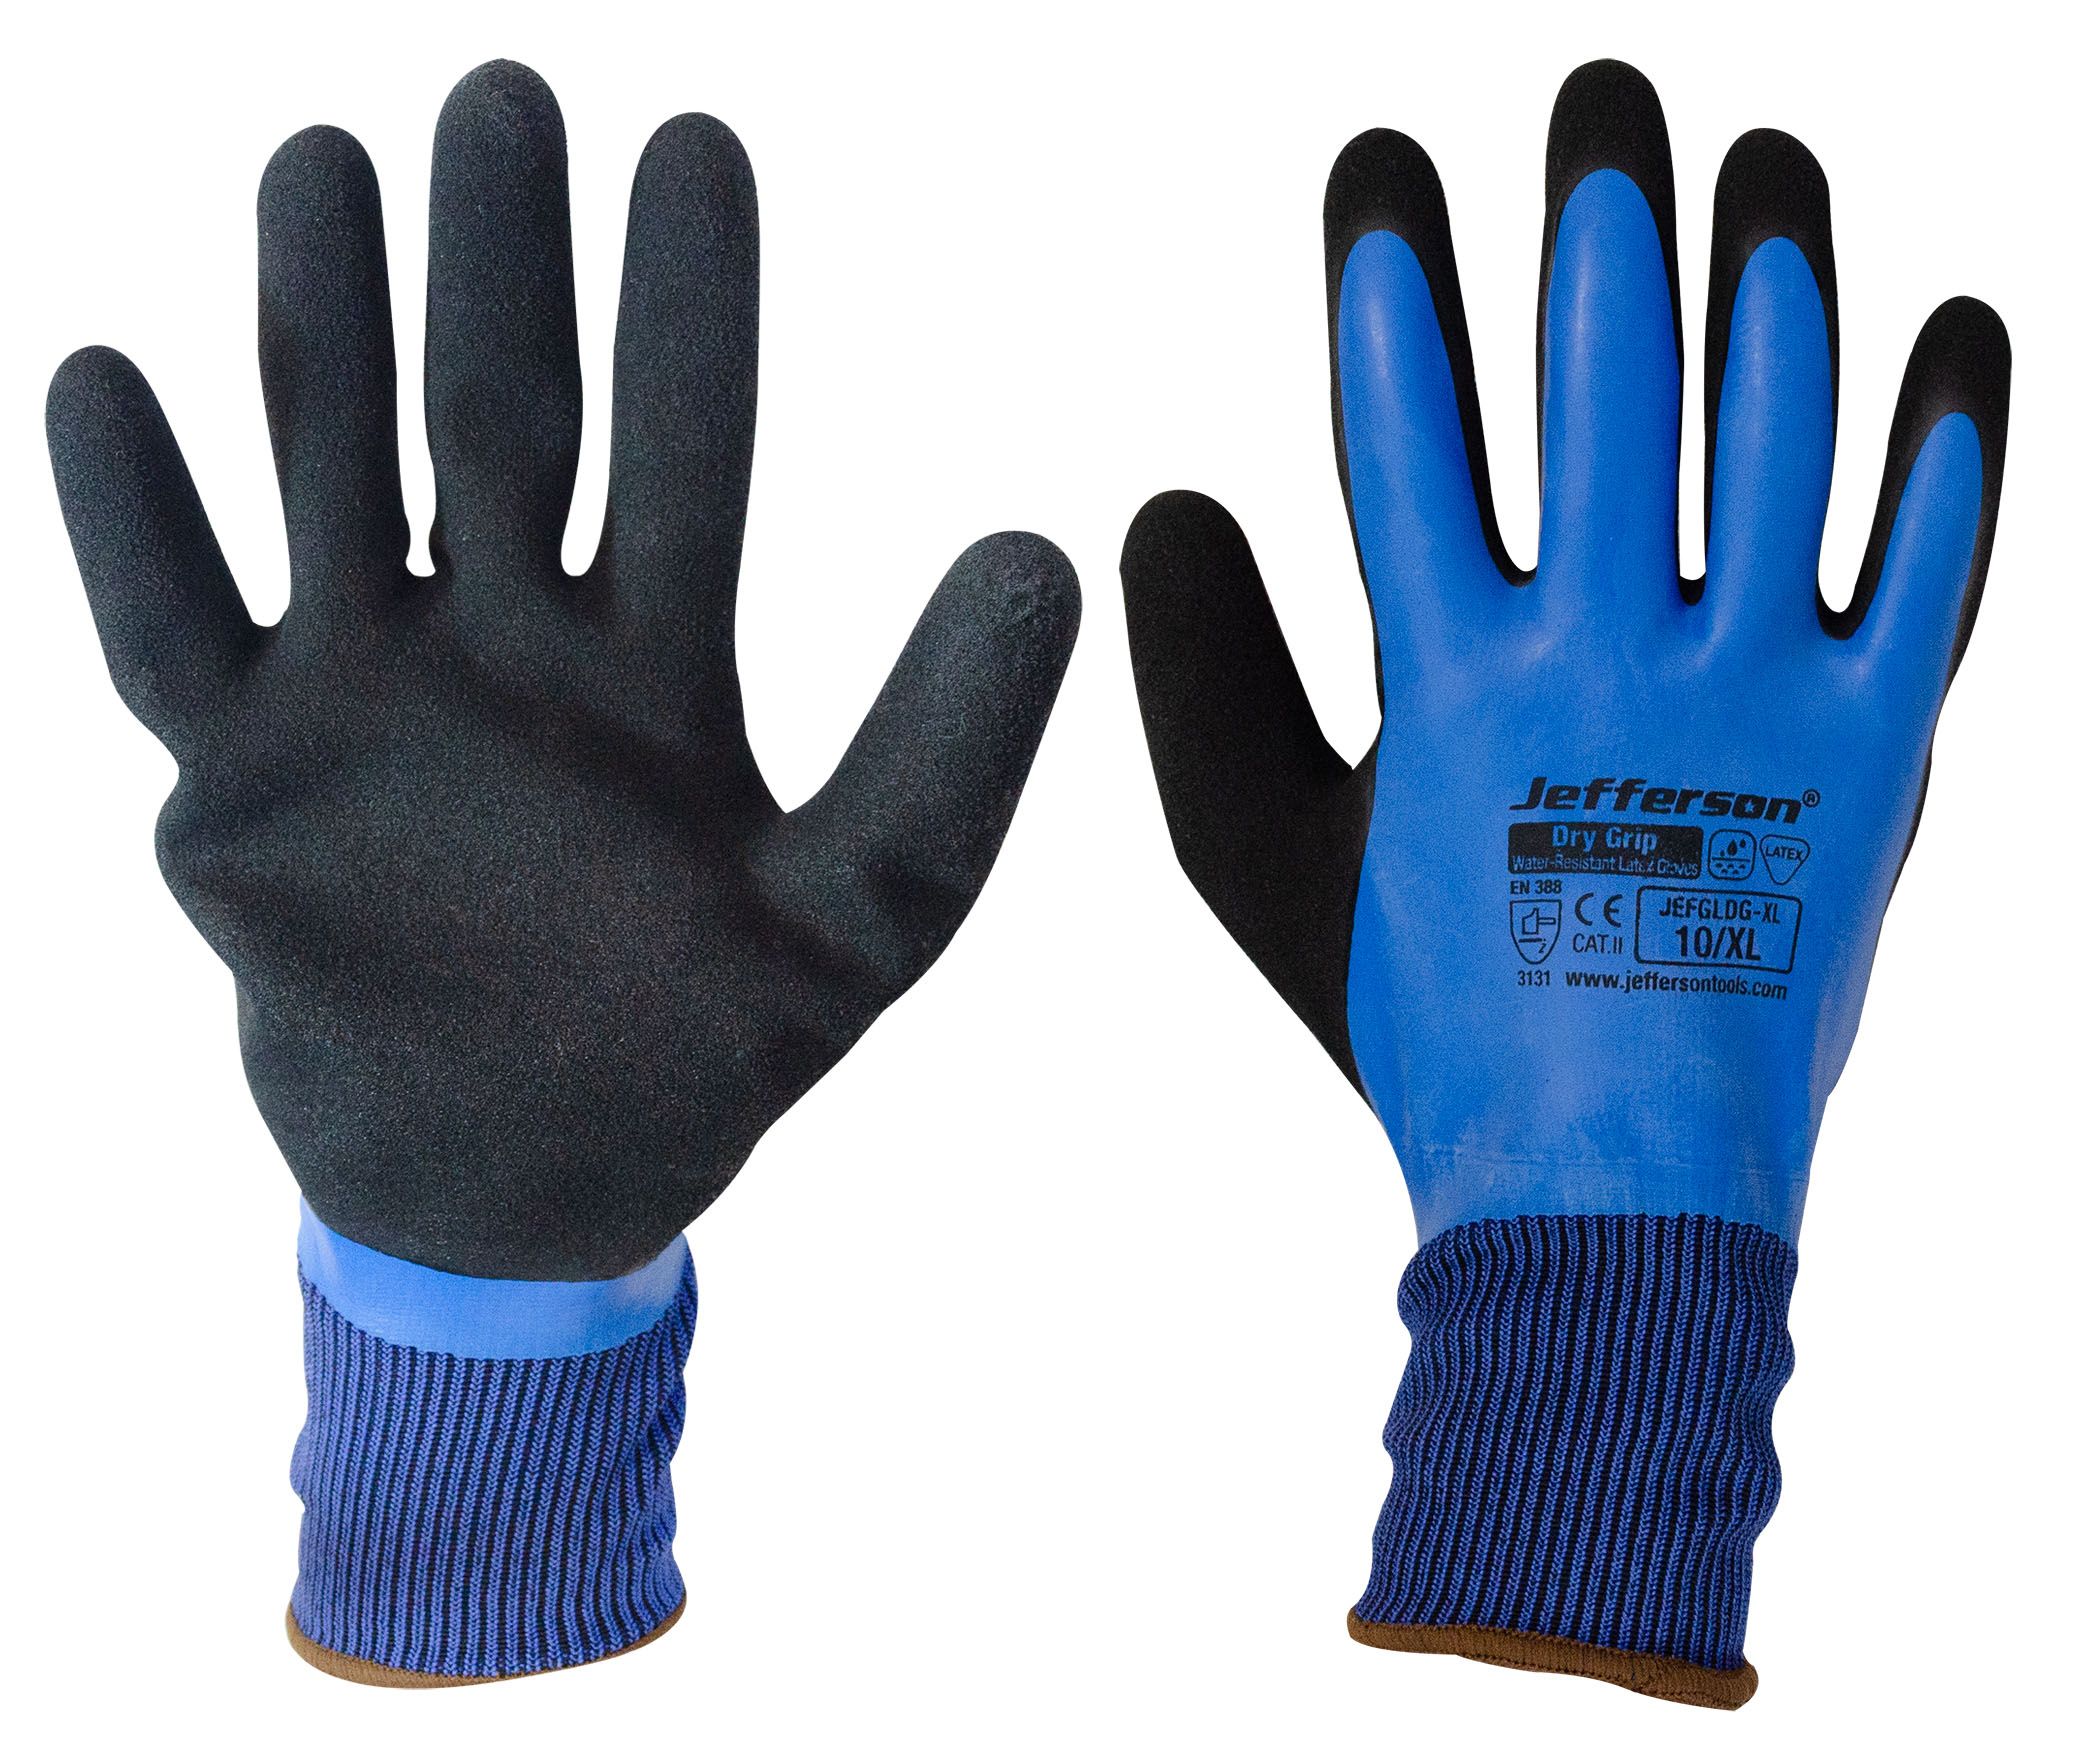 Jefferson Dry Grip Water Resistant Gloves - Large